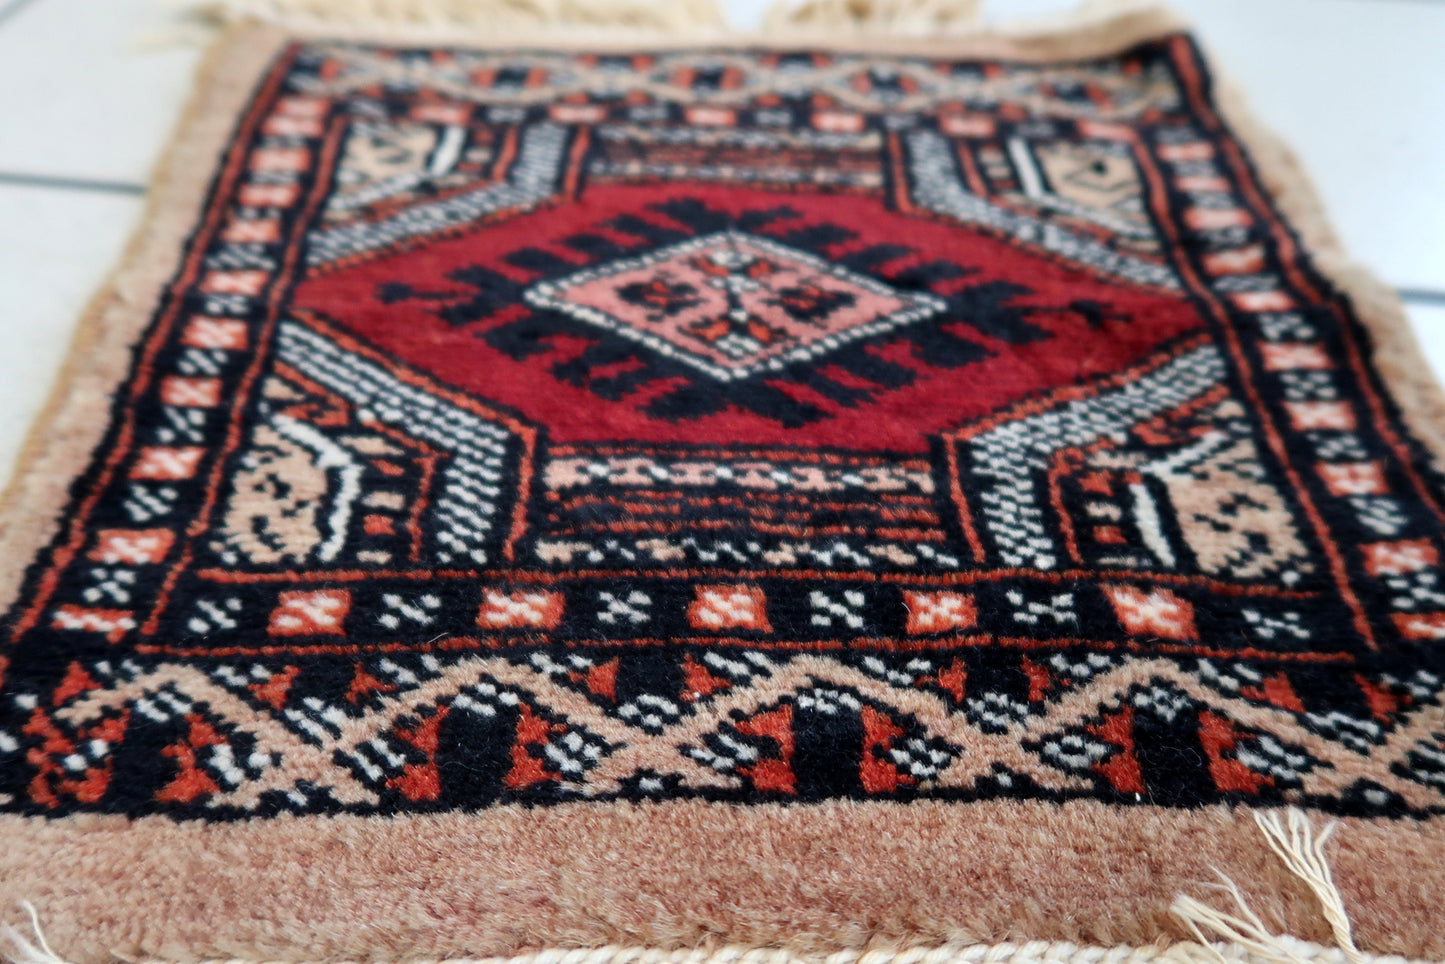 Front view of the mat rug hanging elegantly, capturing its full dimensions and design